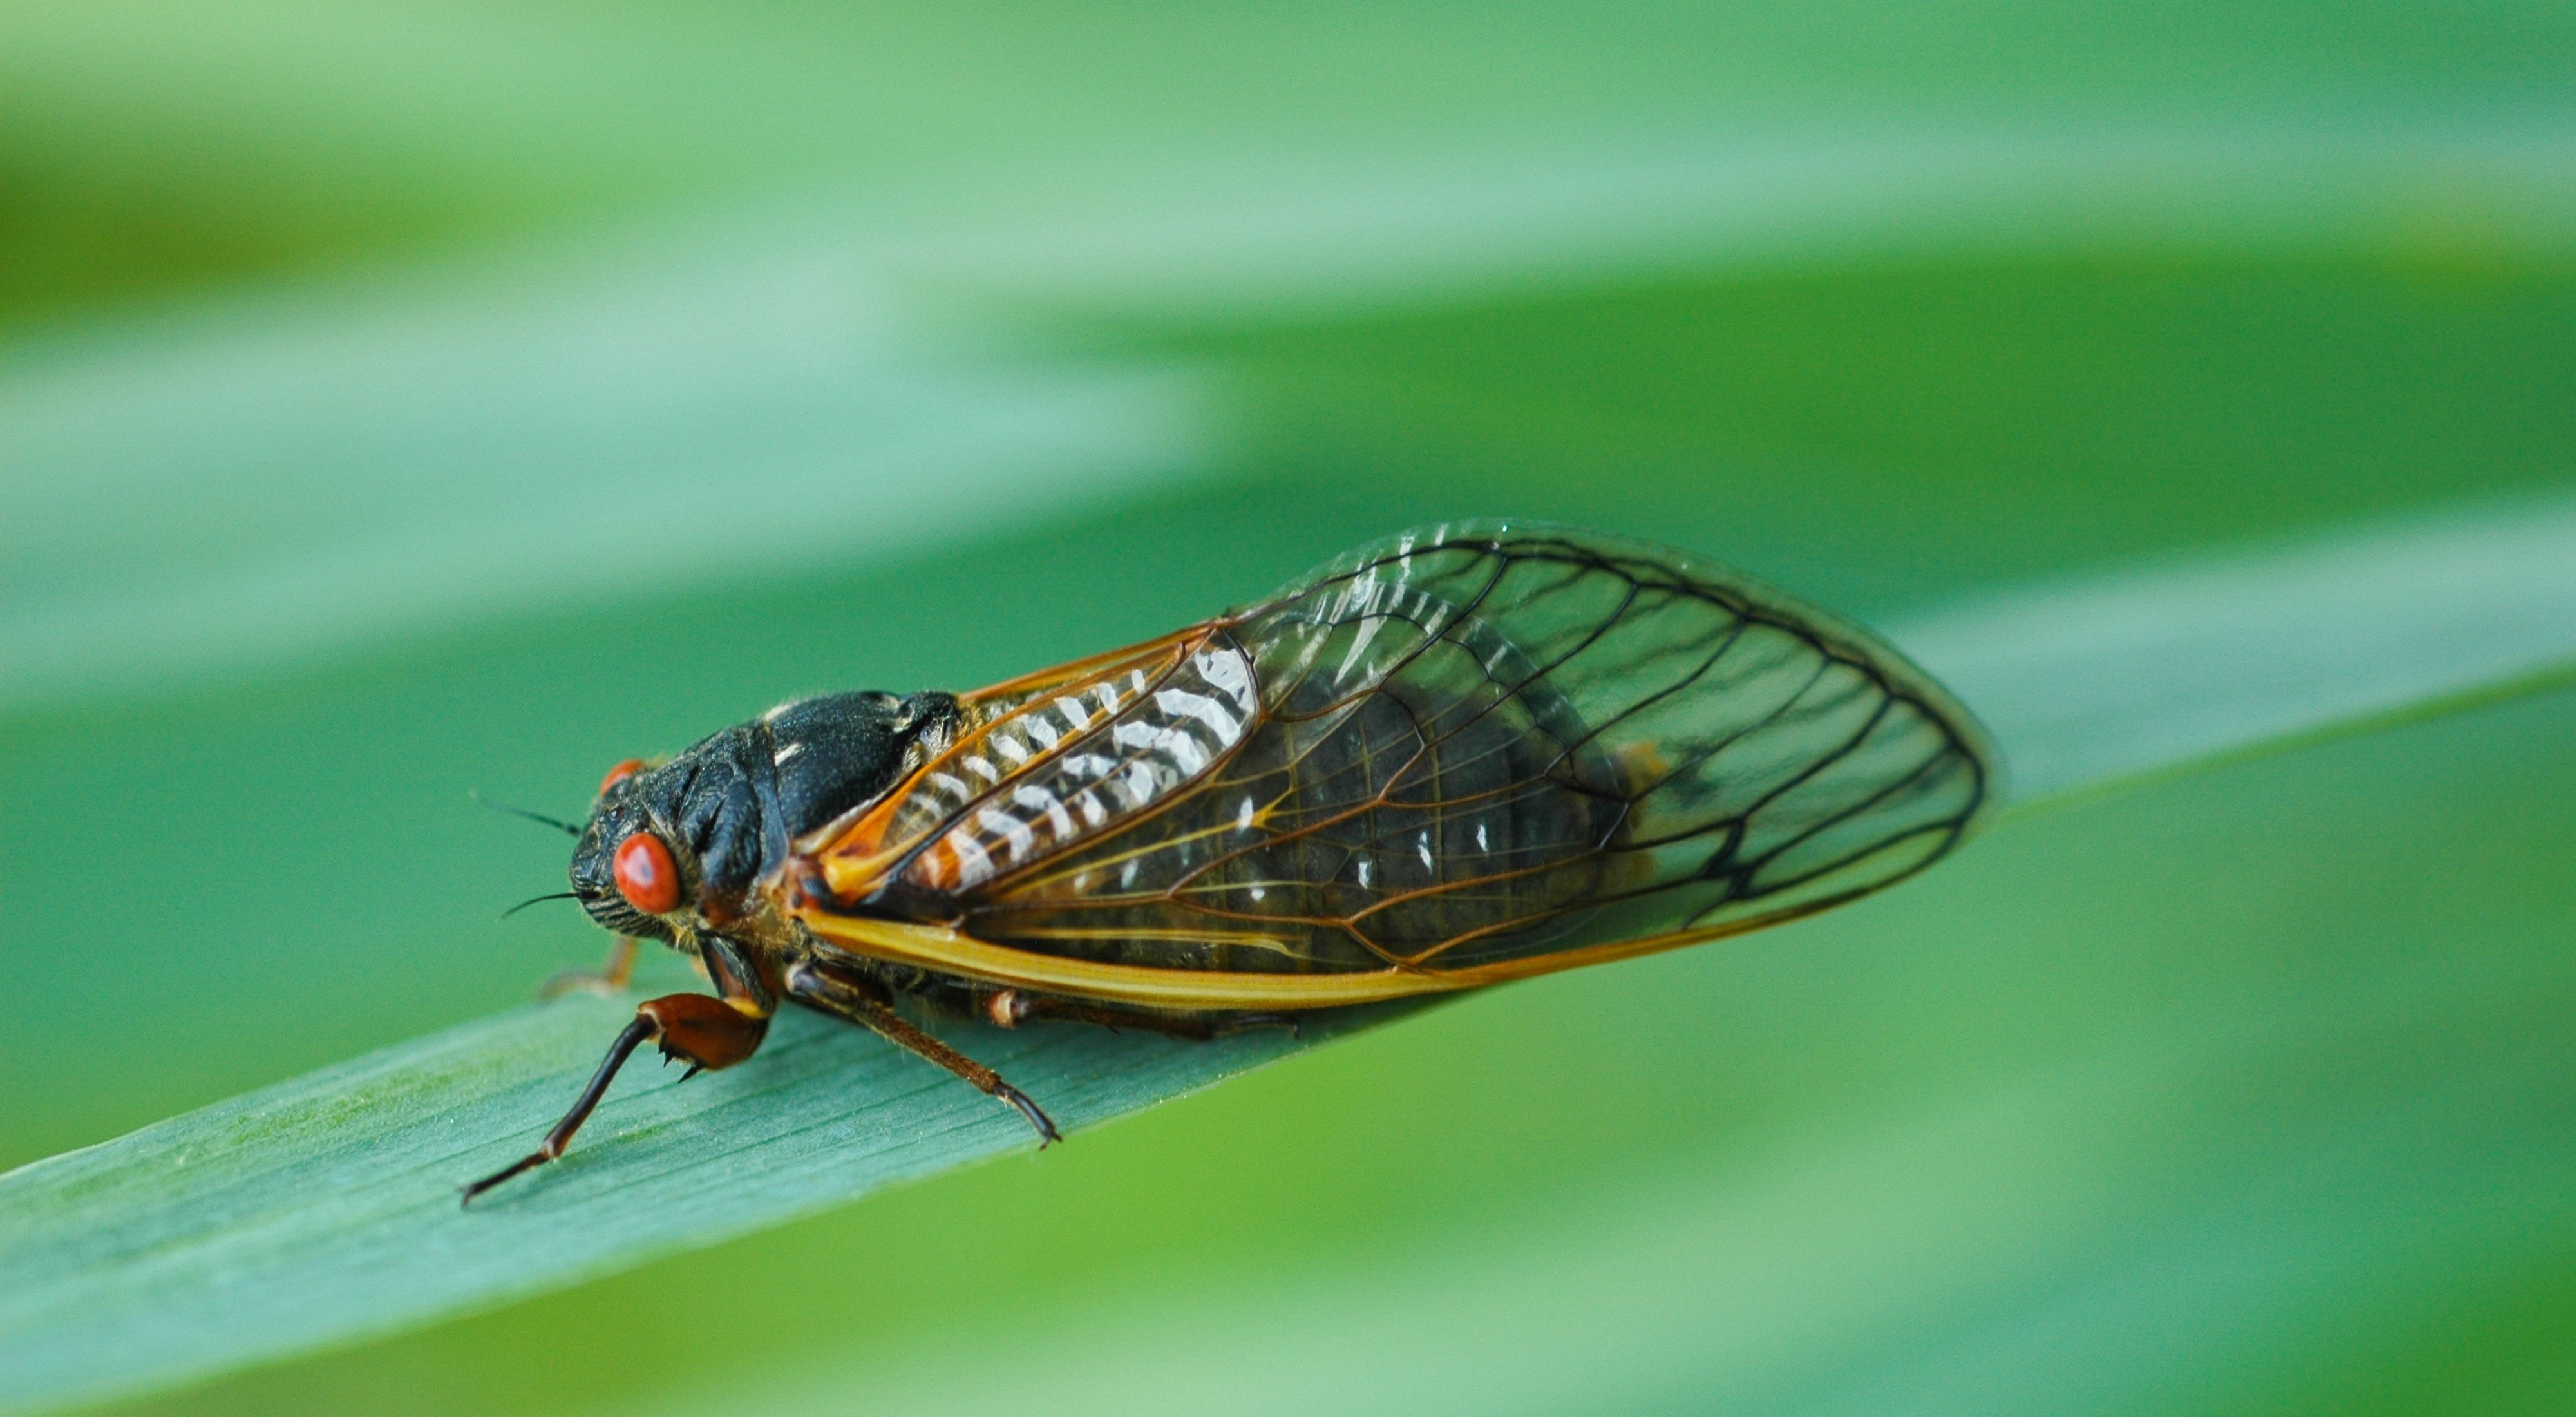 A red-eyed cicada insect sits on a long green leaf.